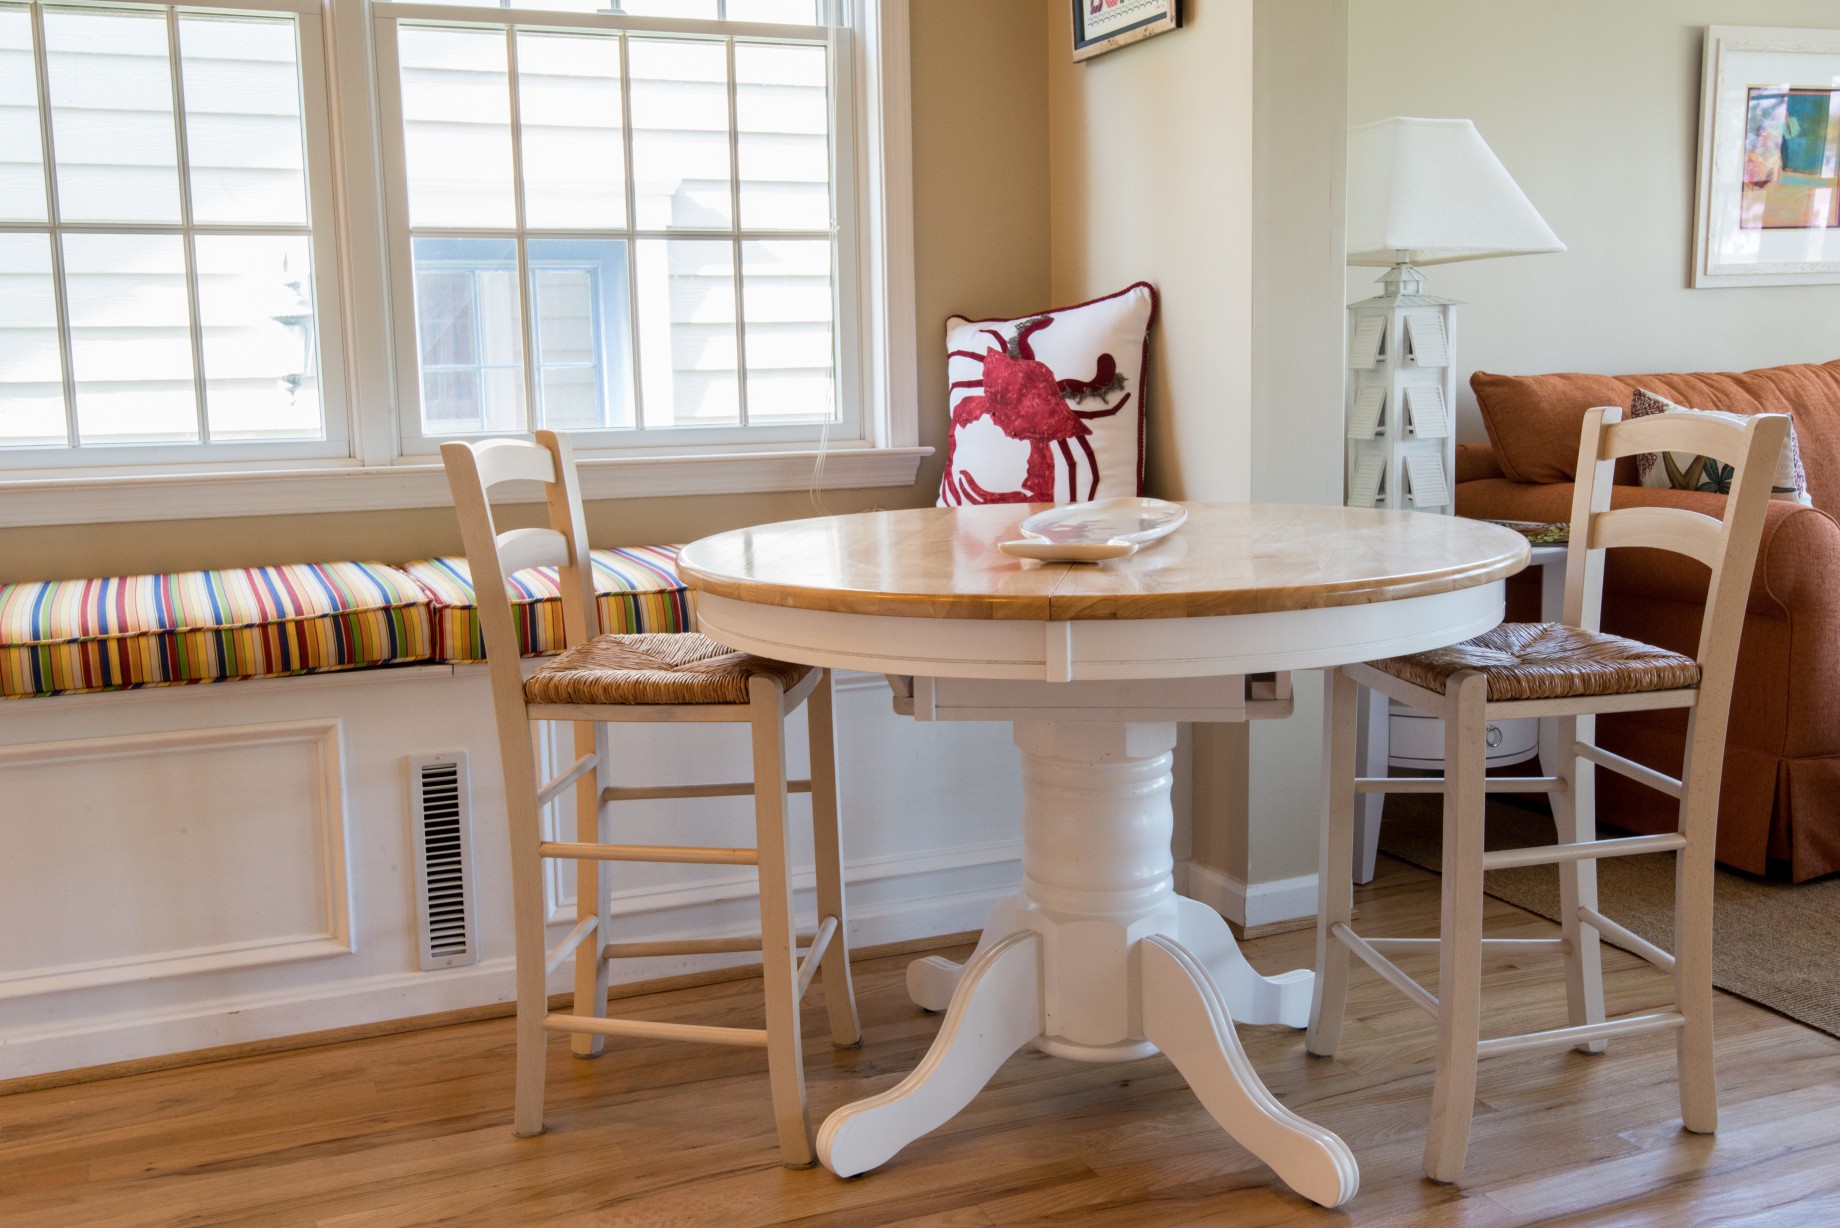 Willow Oak New Addition in Bear Trap Dunes, Ocean View DE Family Room Leisure Area with Bench Seats and Round Table